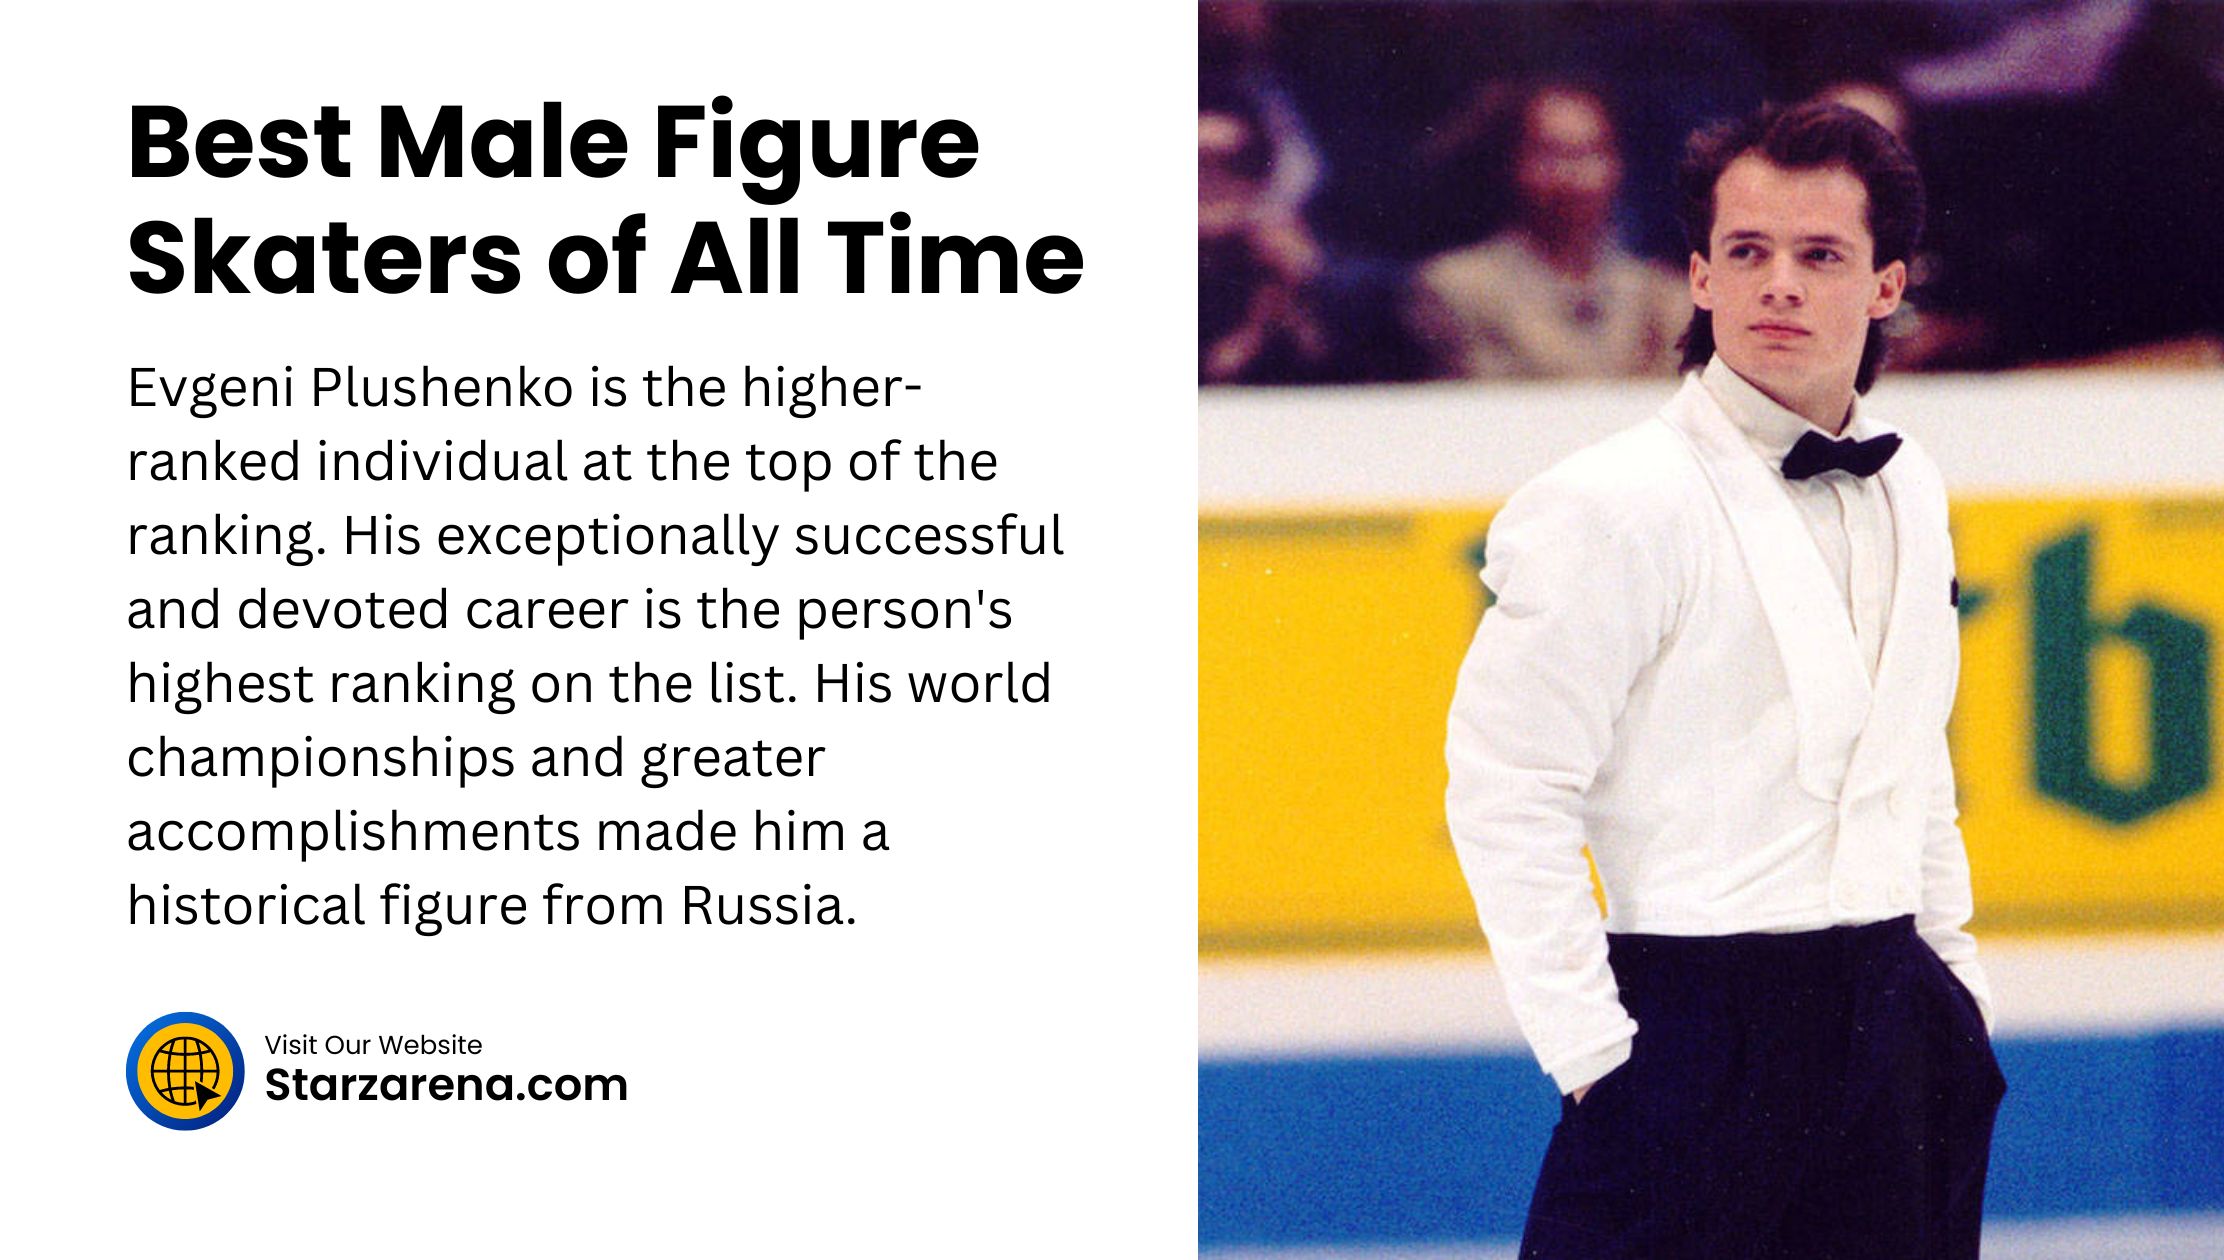 Best Male Figure Skaters of All Time